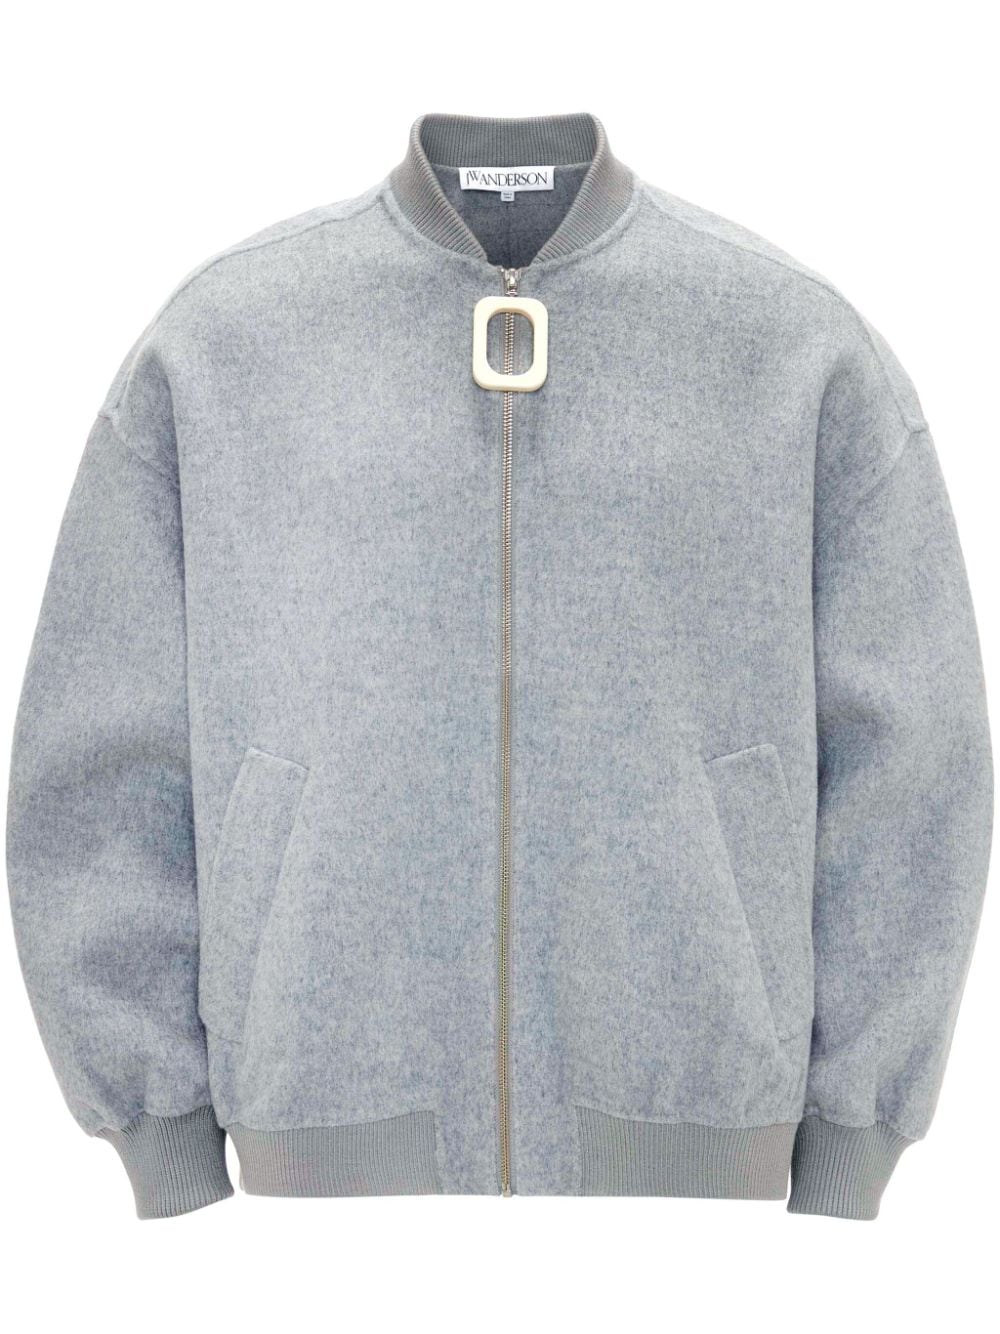 JW Anderson OVERSIZED WOOL BOMBER JACKET WITH LOGO PATCH - Grey von JW Anderson